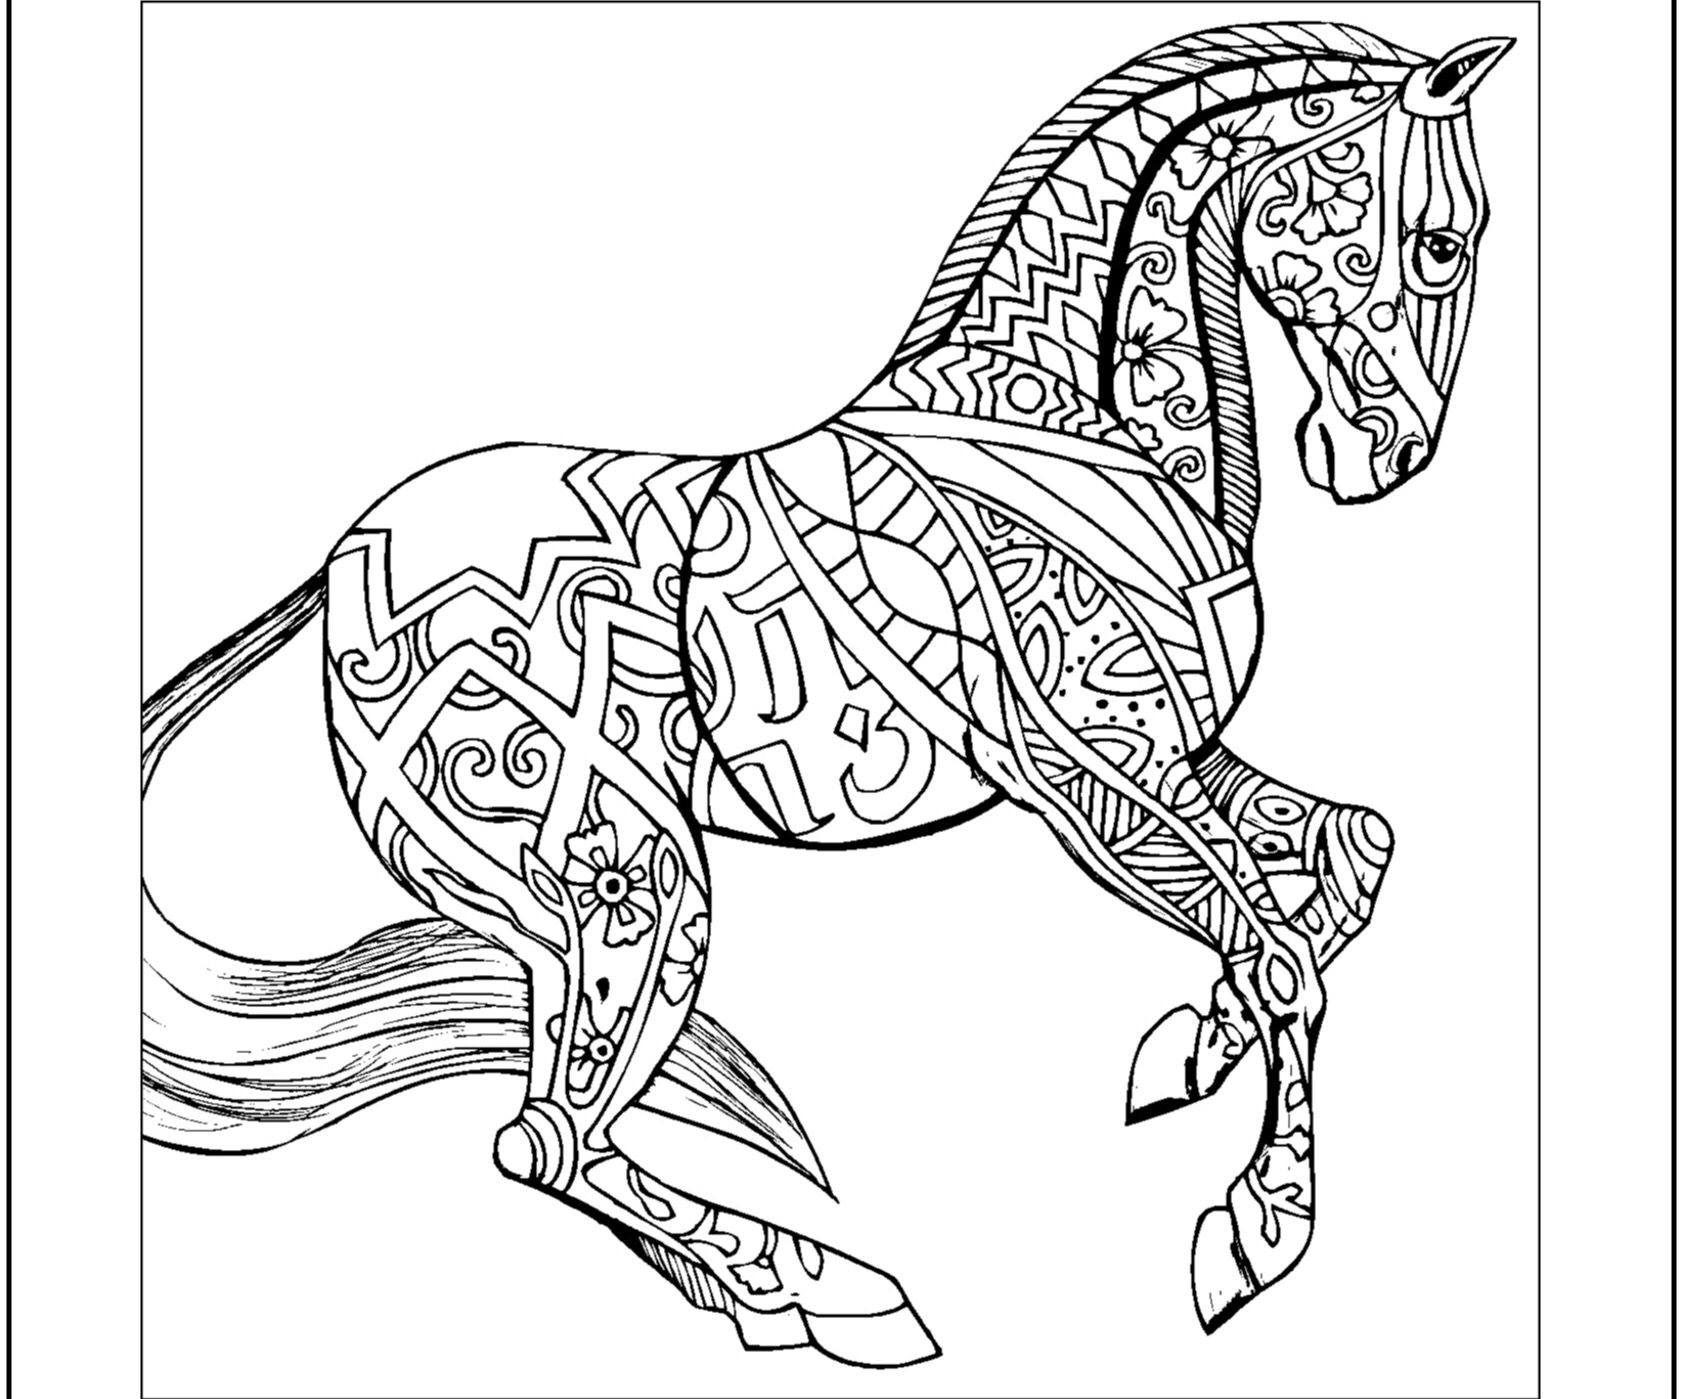 Cute Hard Coloring Pages at GetColorings.com | Free ...